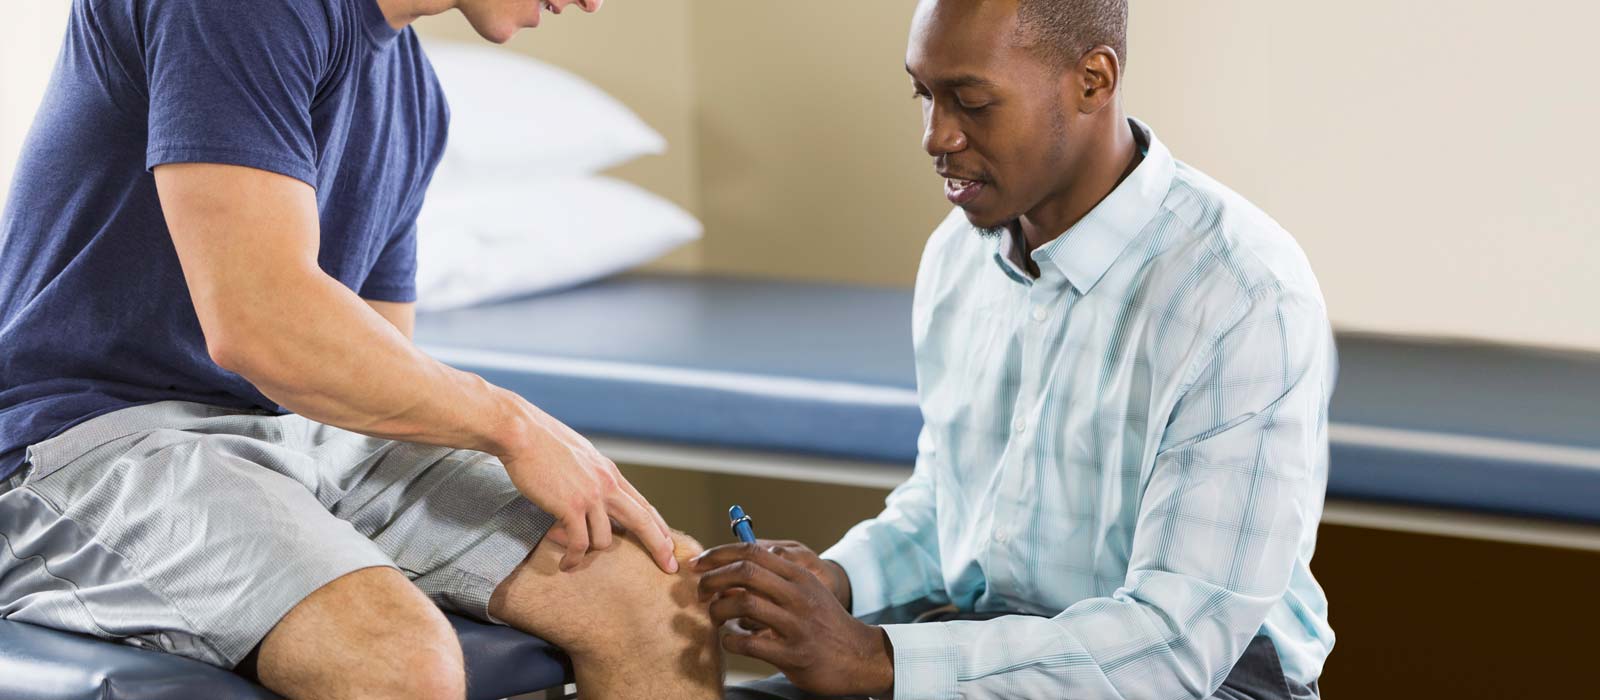 Physical therapy patient getting treatment